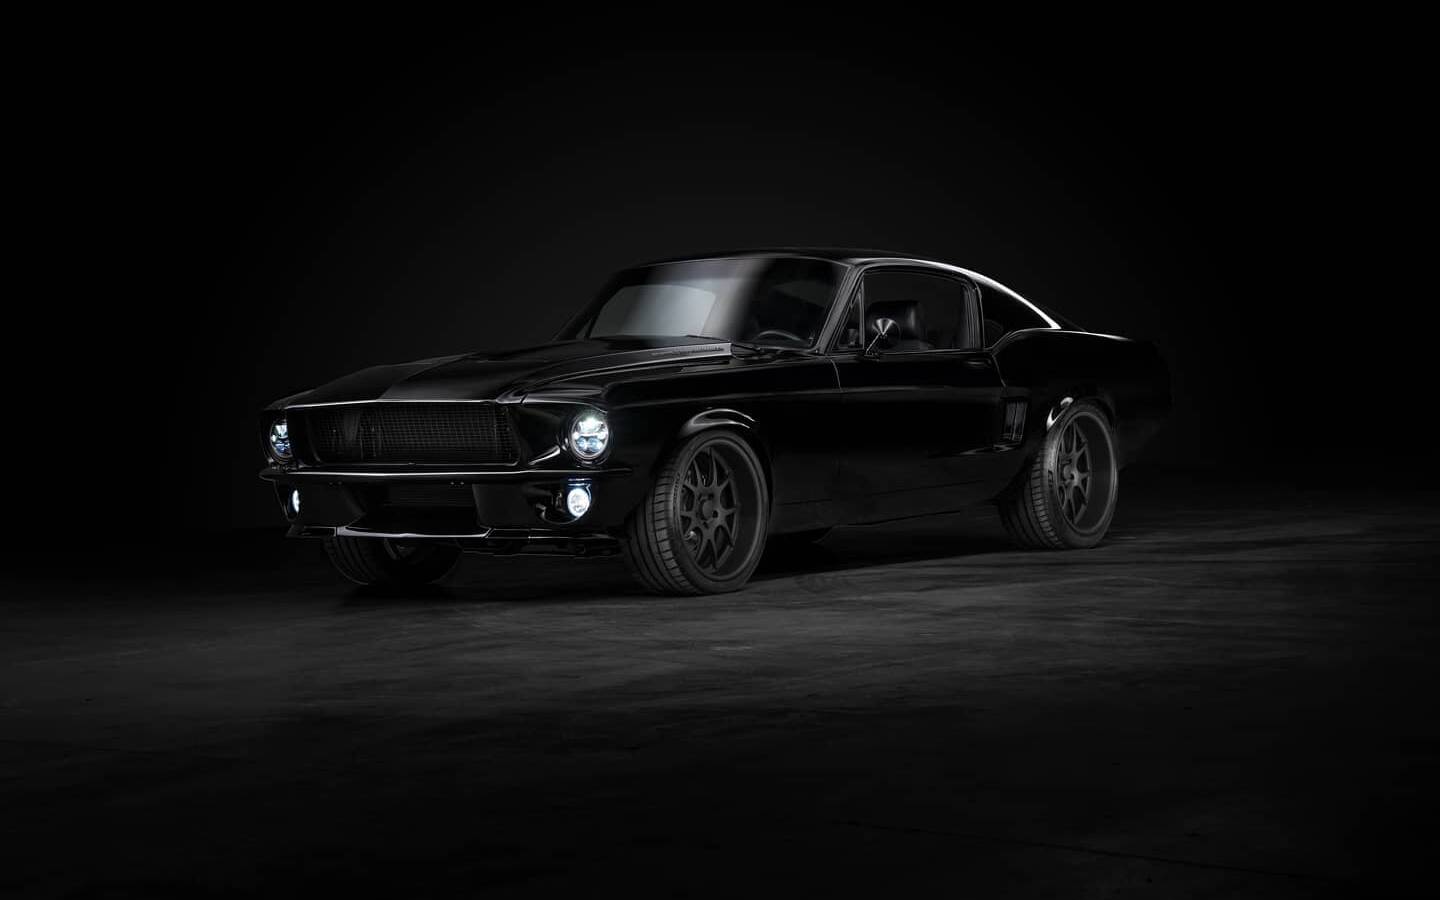 We Adore This All-black 1967 Mustang With 800 Horsepower - The Car ...